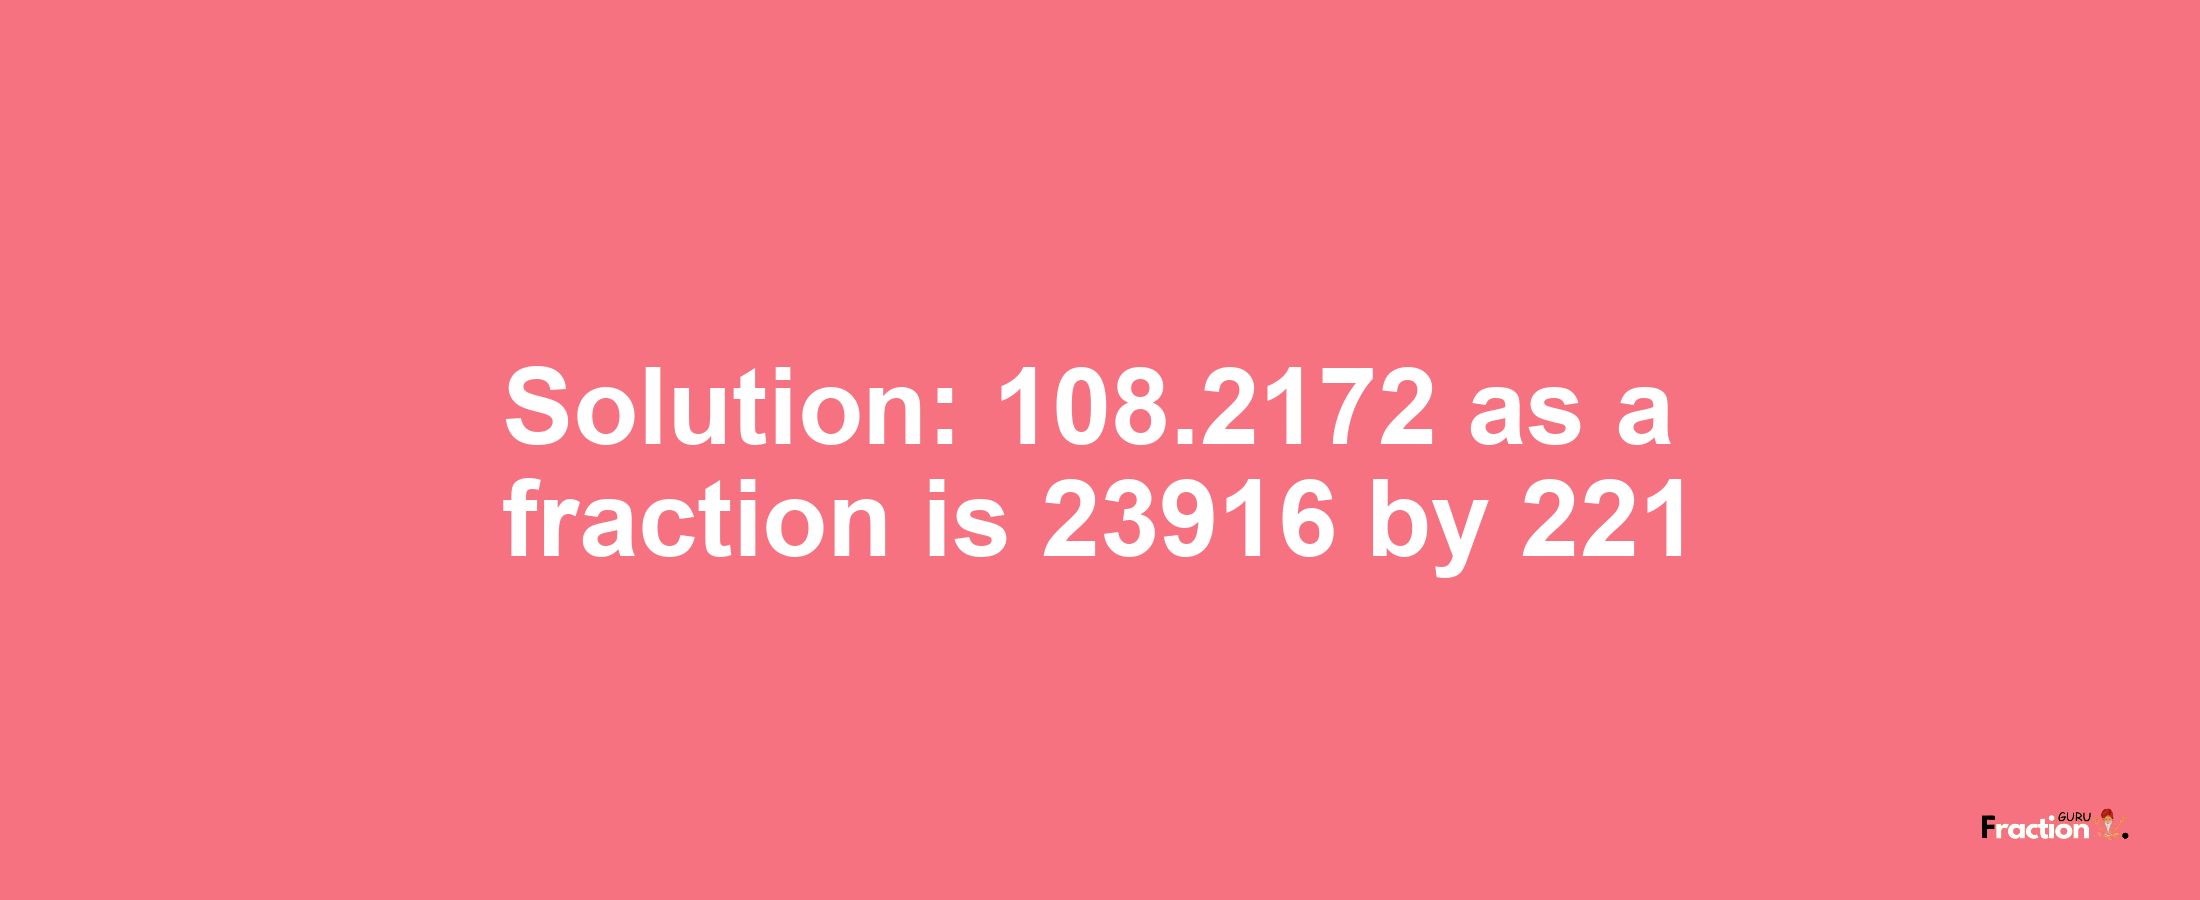 Solution:108.2172 as a fraction is 23916/221